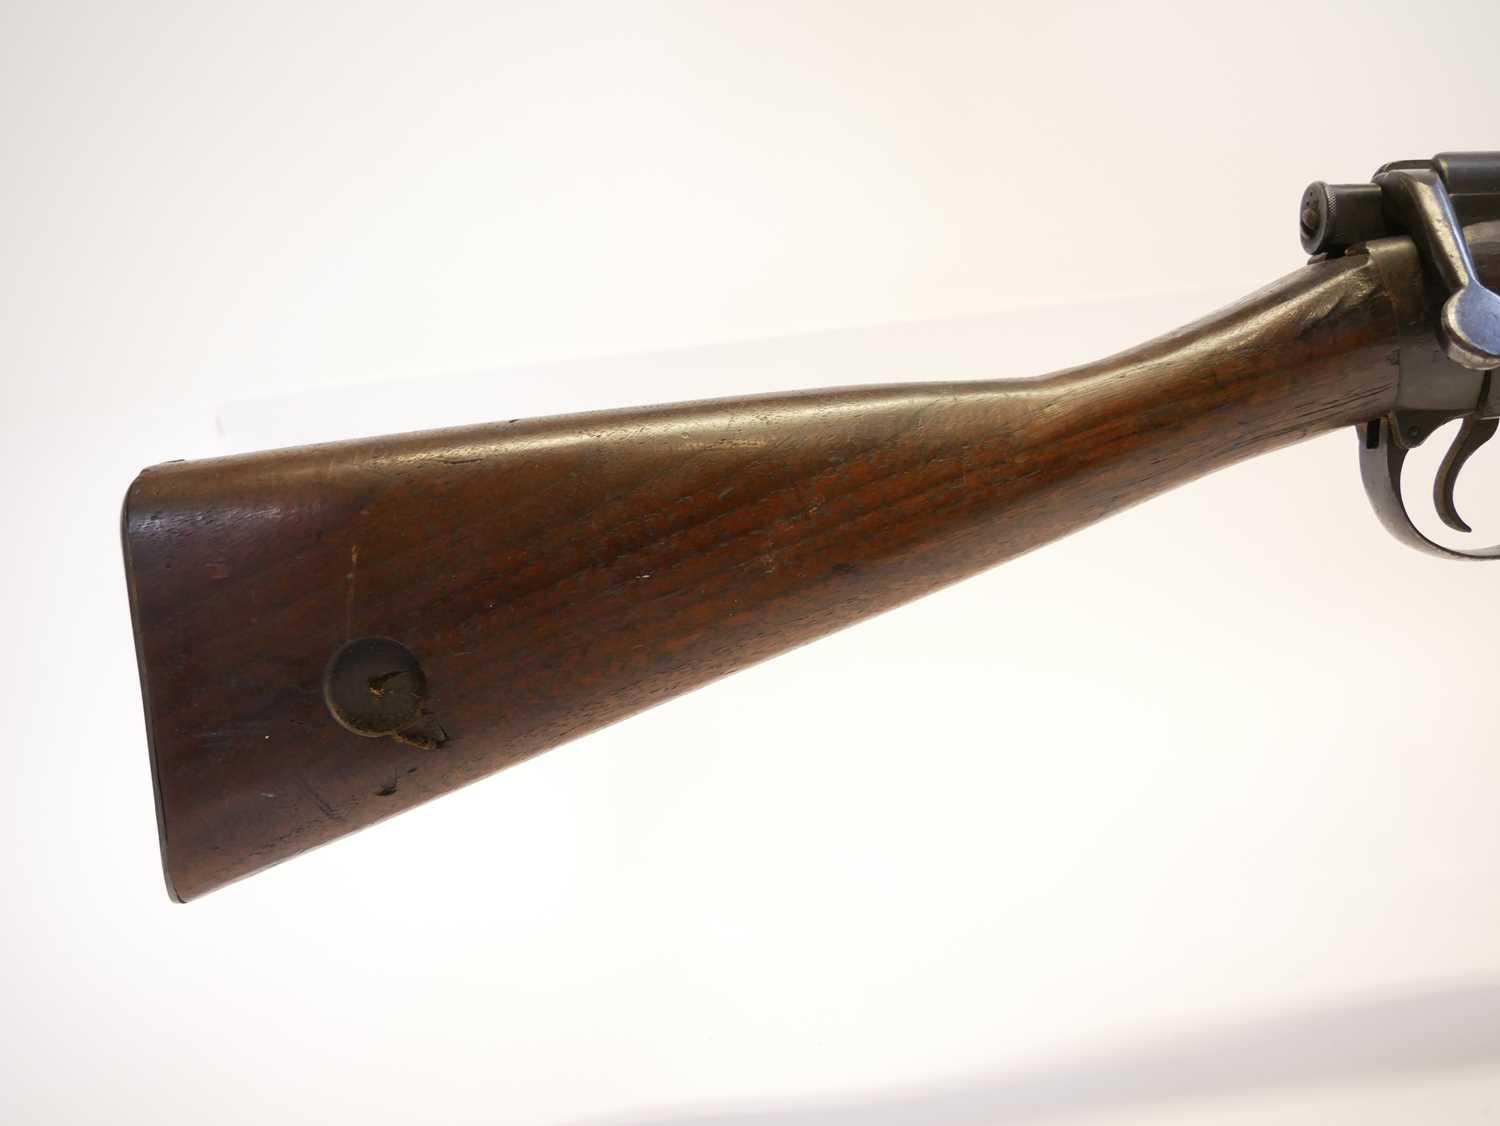 London Small Arms Lee Enfield .22 bolt action rifle, serial number 21324, 25inch barrel fitted - Image 3 of 14